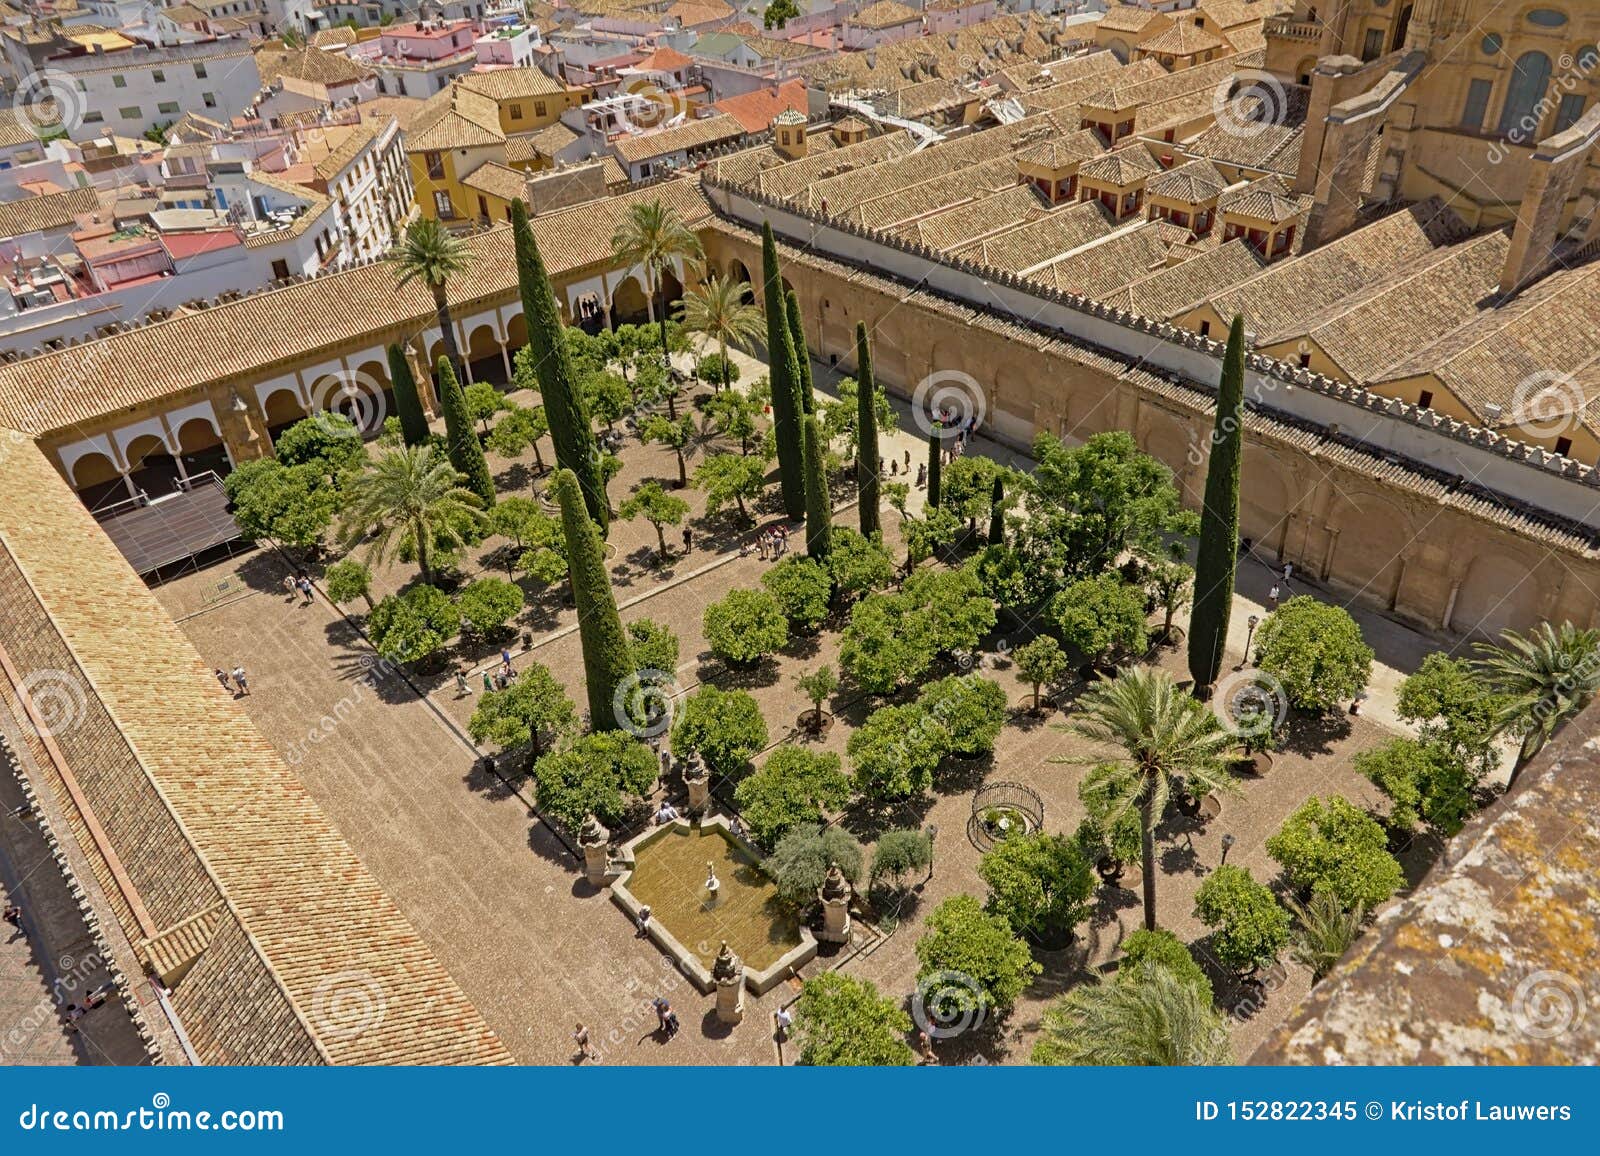 Aerial View On The Patio Of The Orange Trees Of The Cathedral